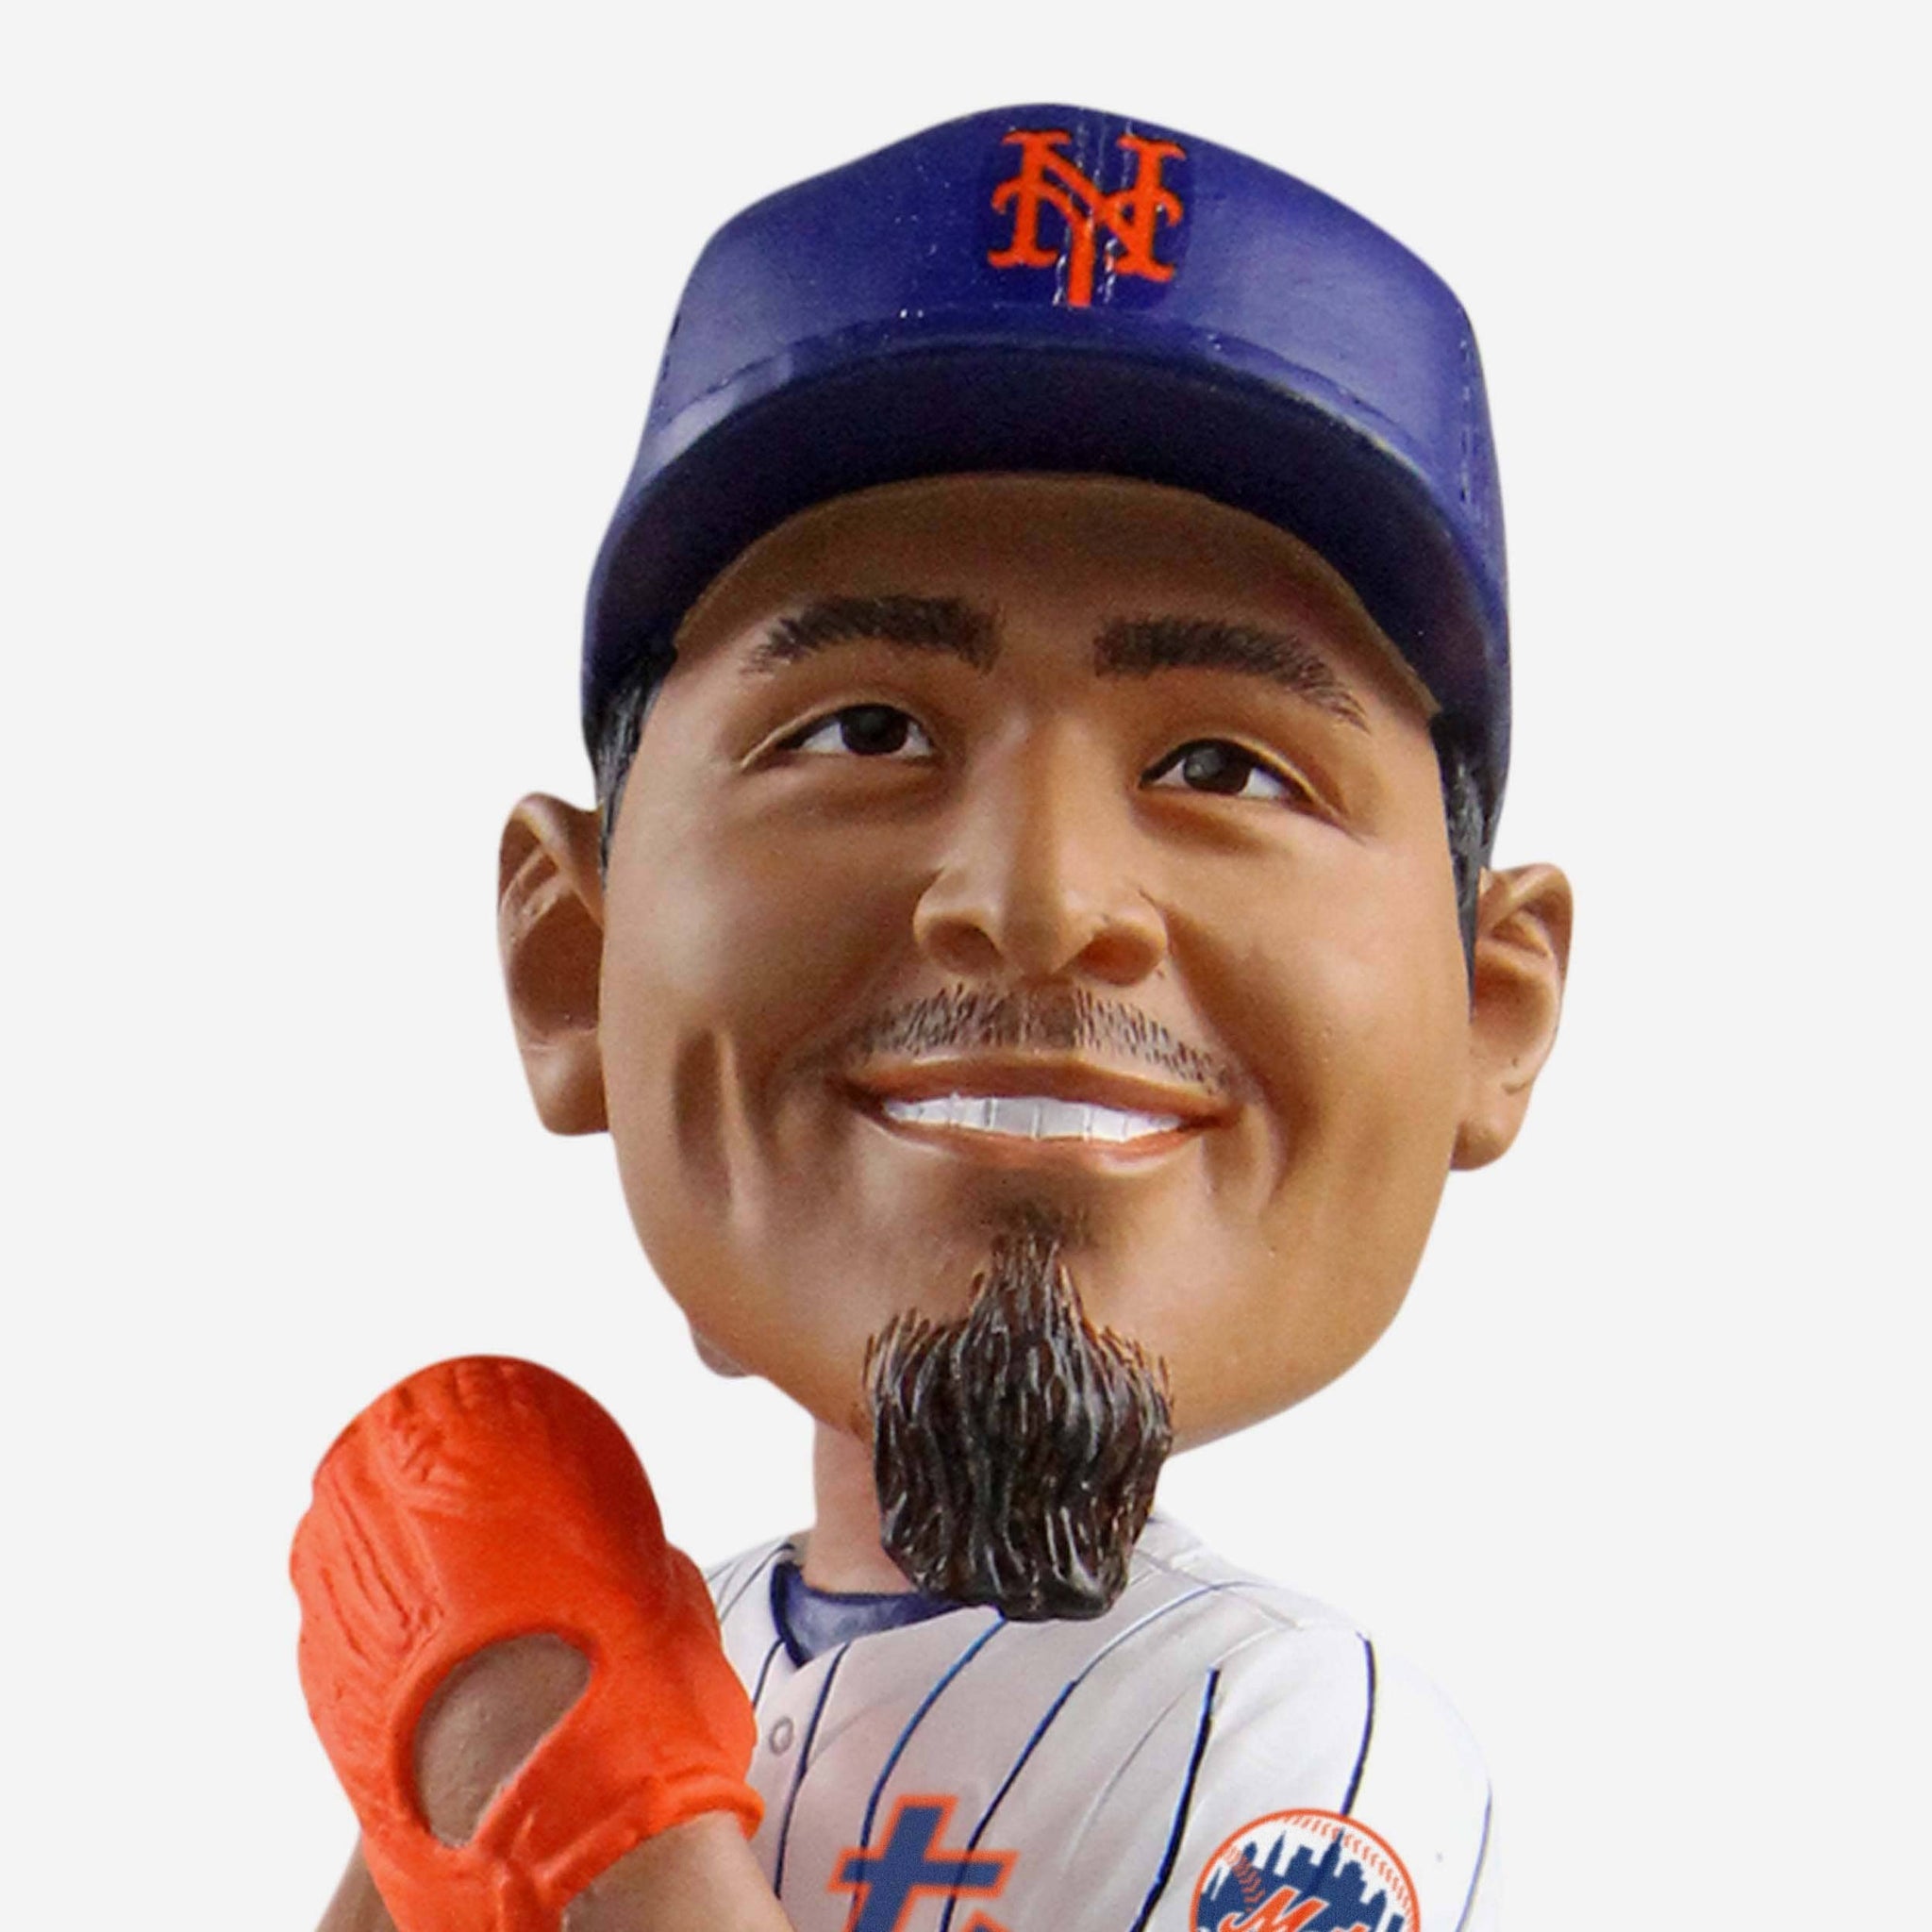 Carlos Carrasco New York Mets Black Jersey Bobblehead Officially Licensed by MLB